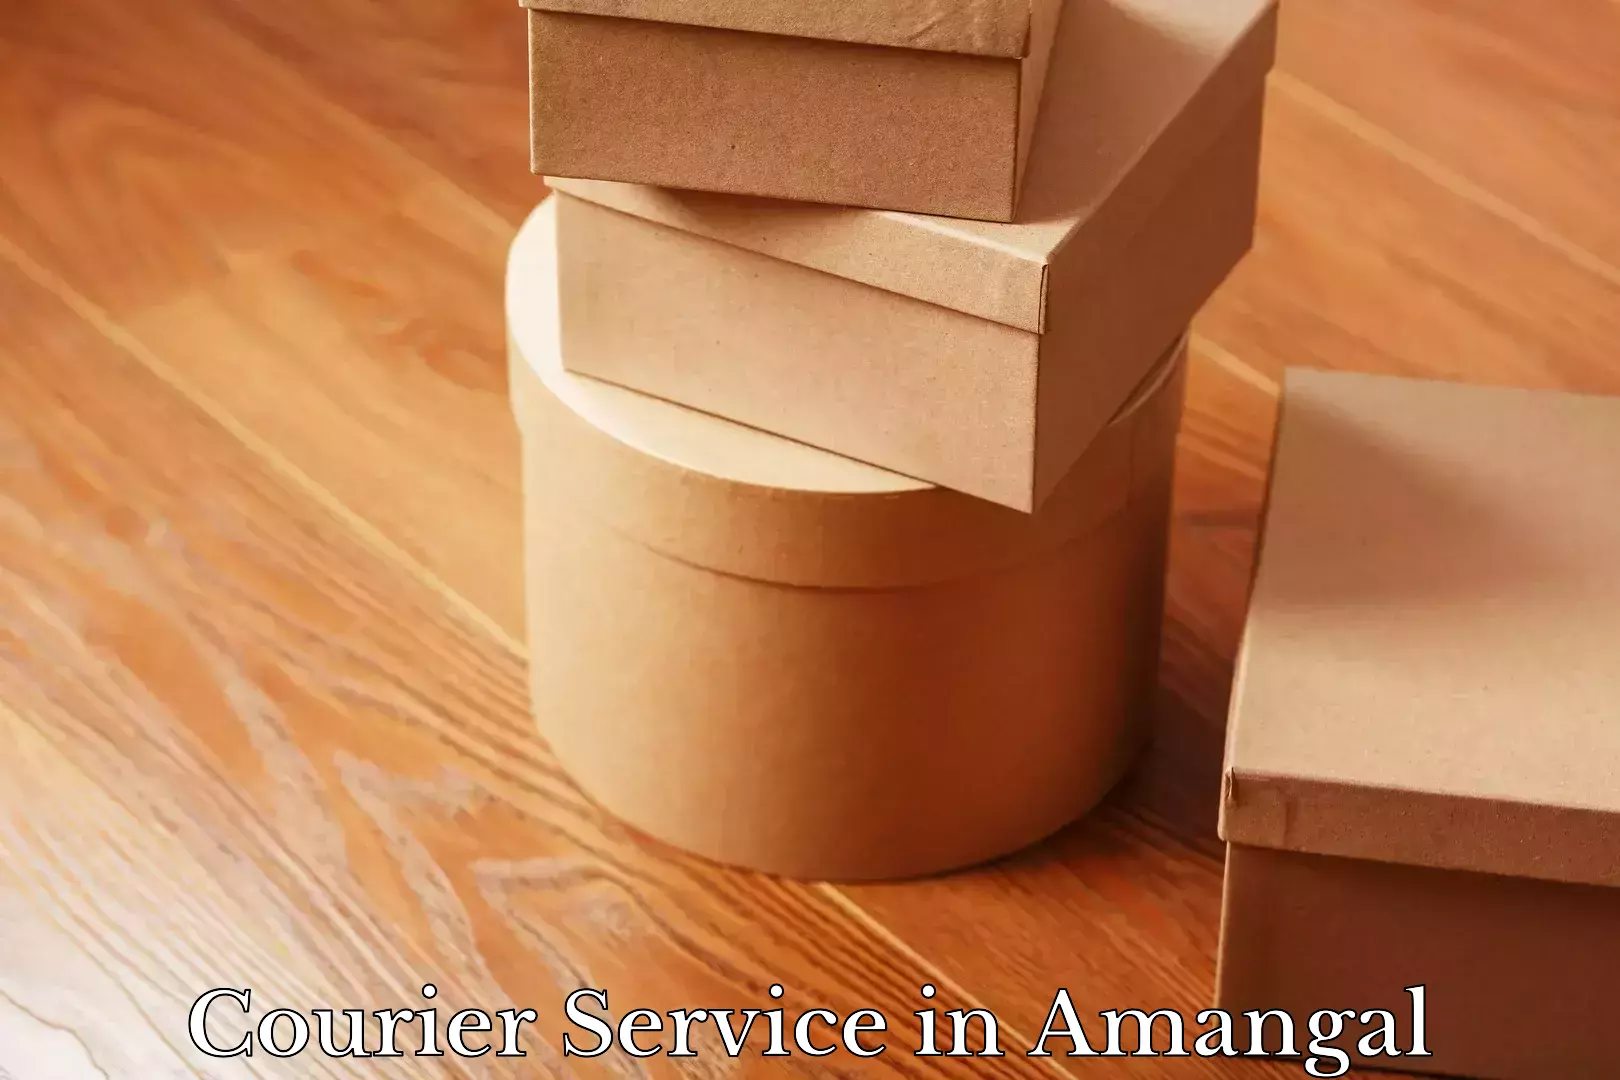 Delivery service partnership in Amangal